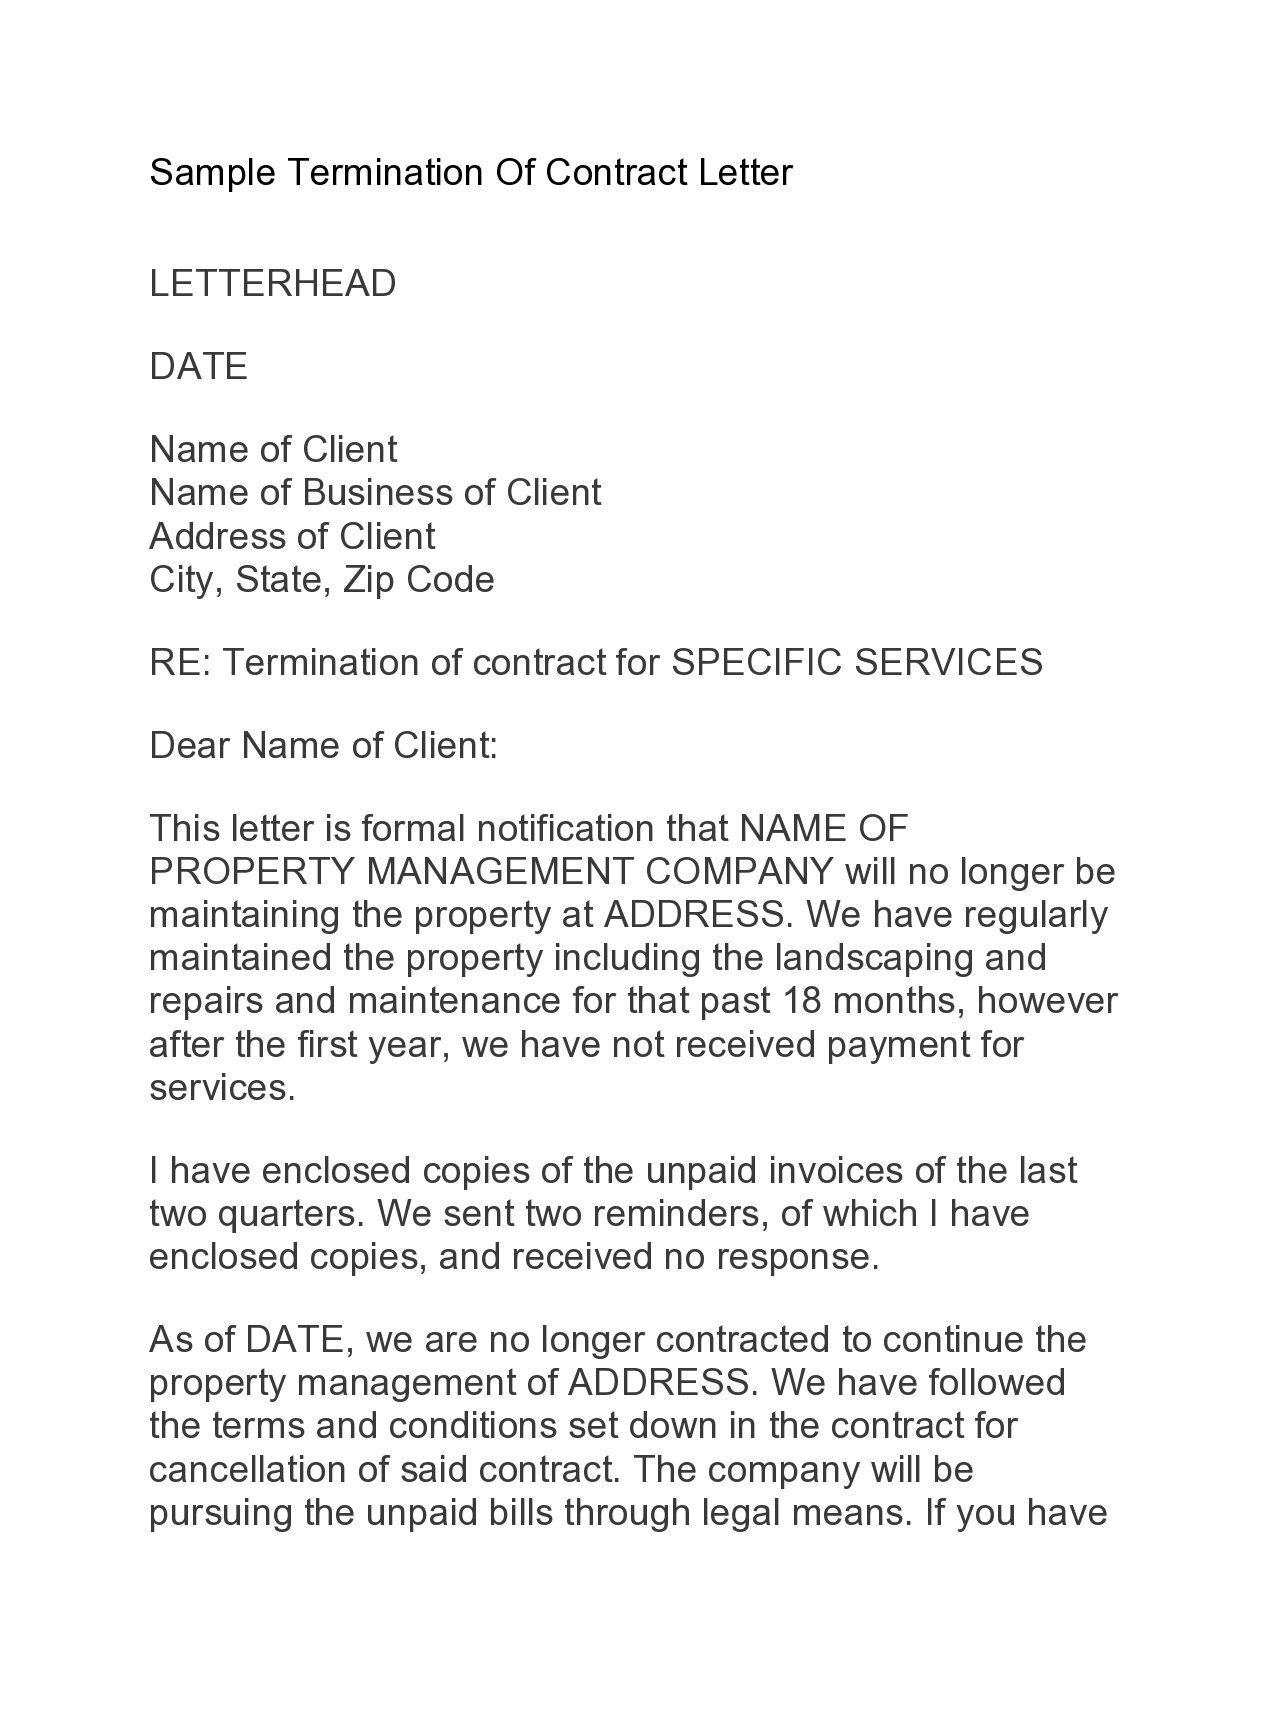 Free contract termination letter 40